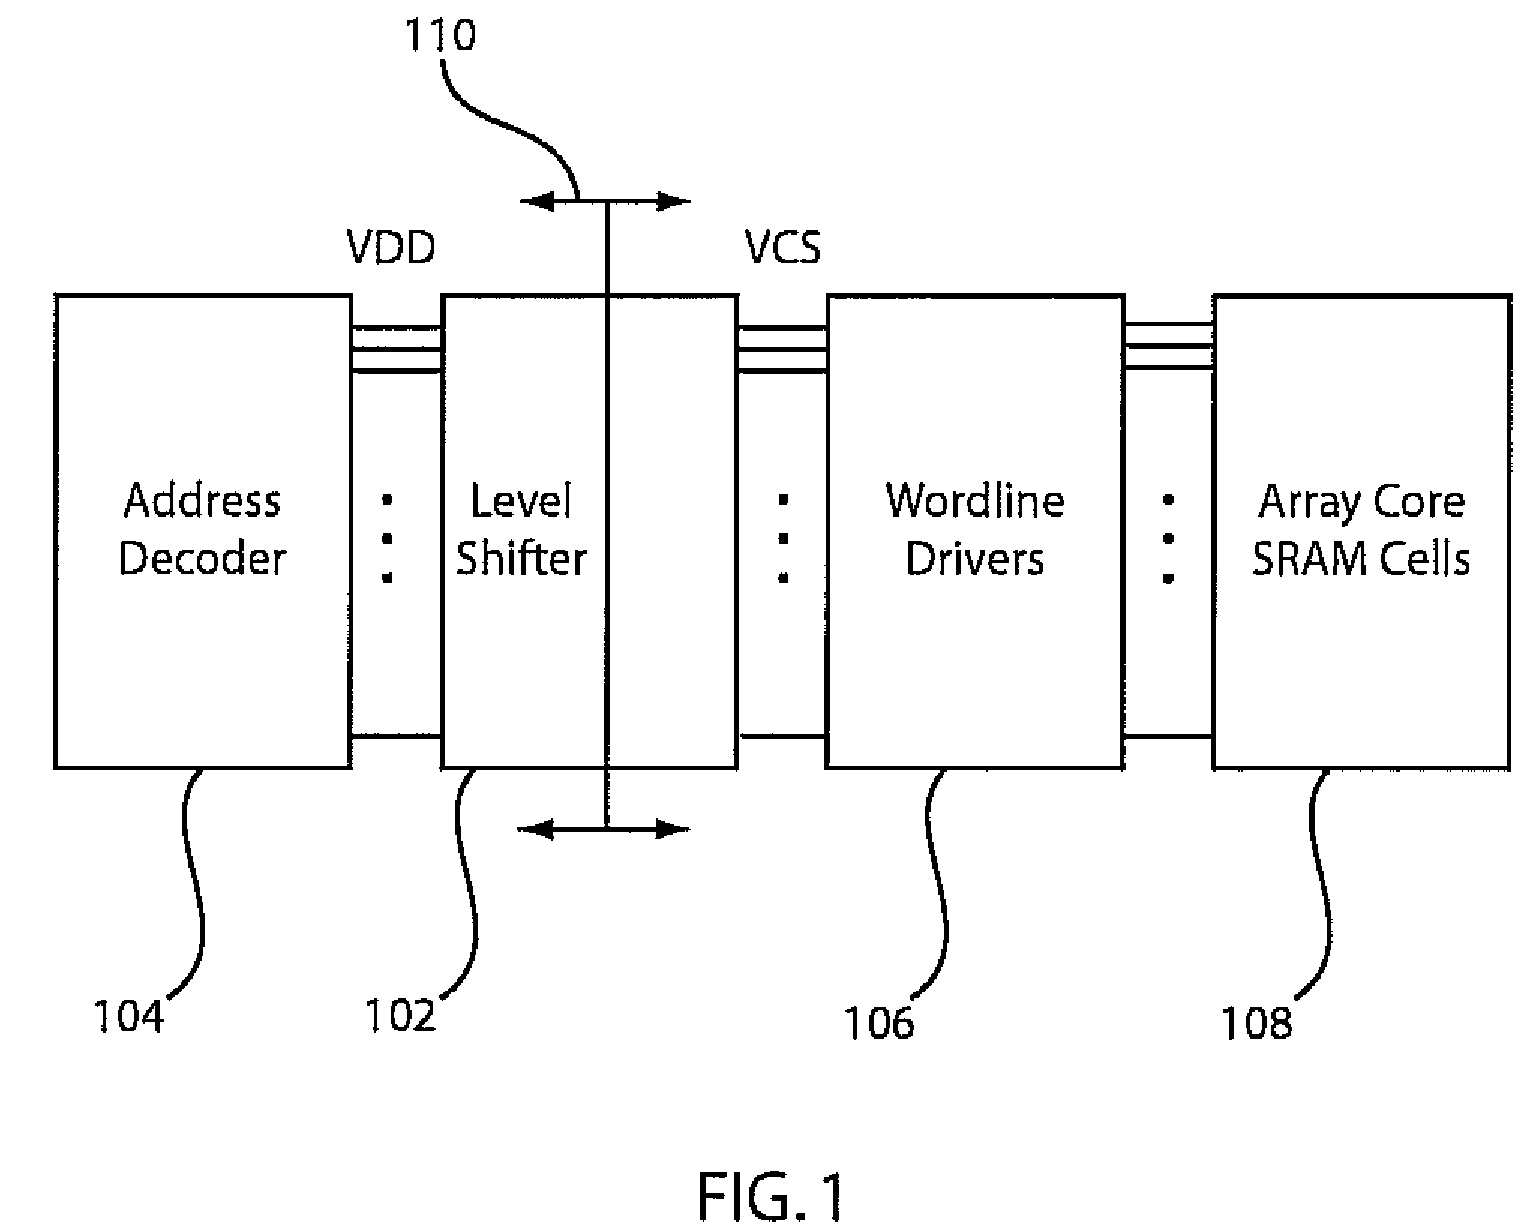 Level shifter for boosting wordline voltage and memory cell performance